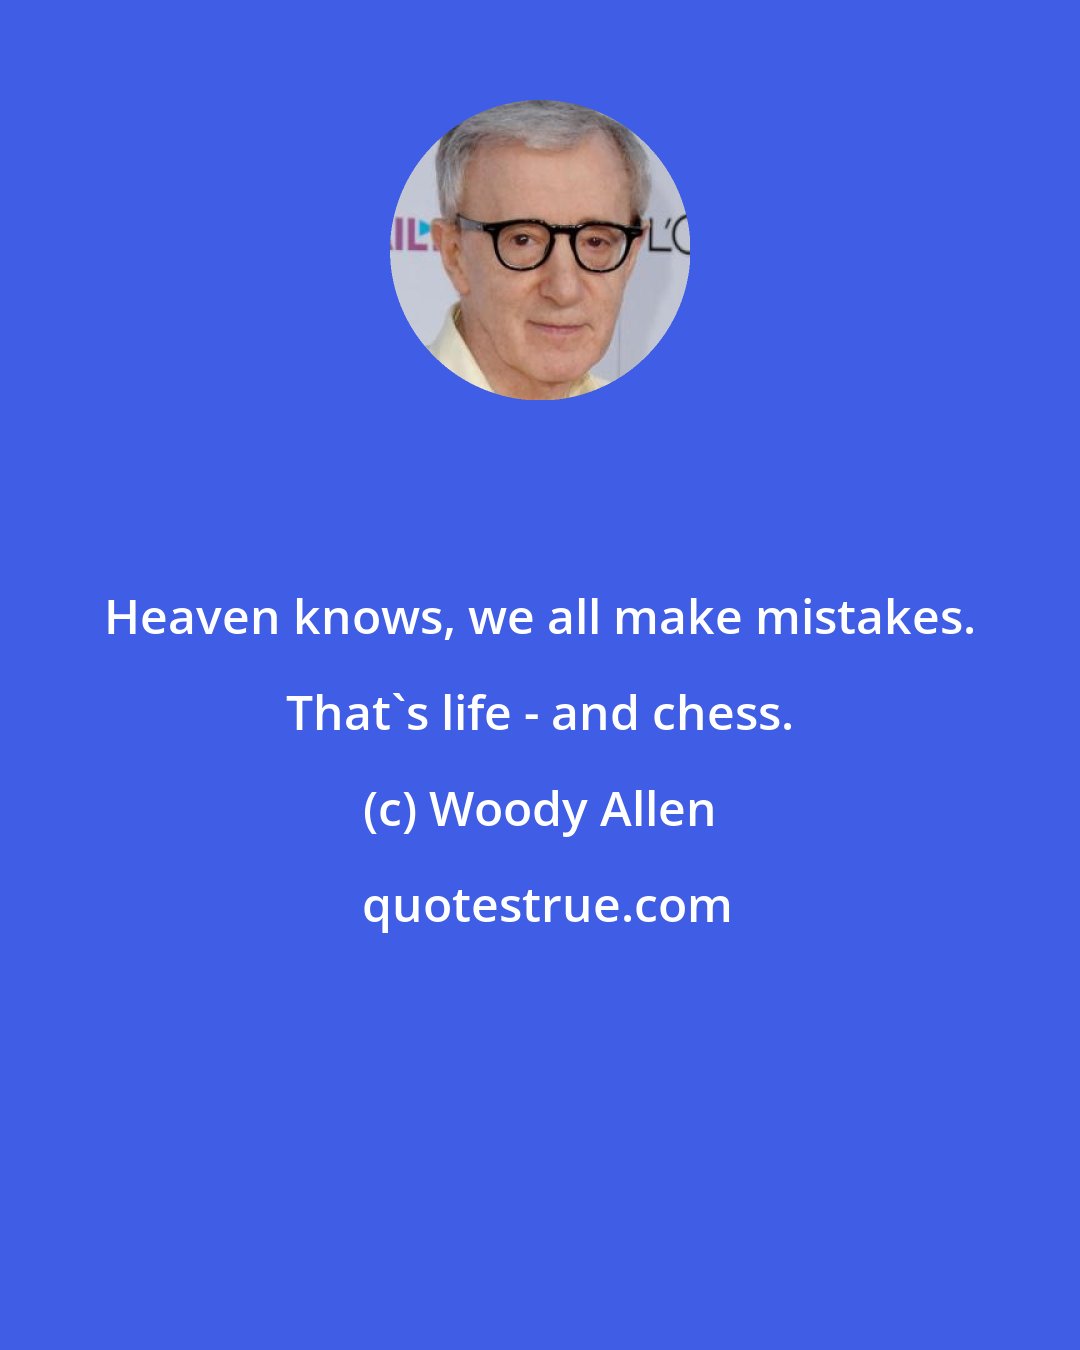 Woody Allen: Heaven knows, we all make mistakes. That's life - and chess.